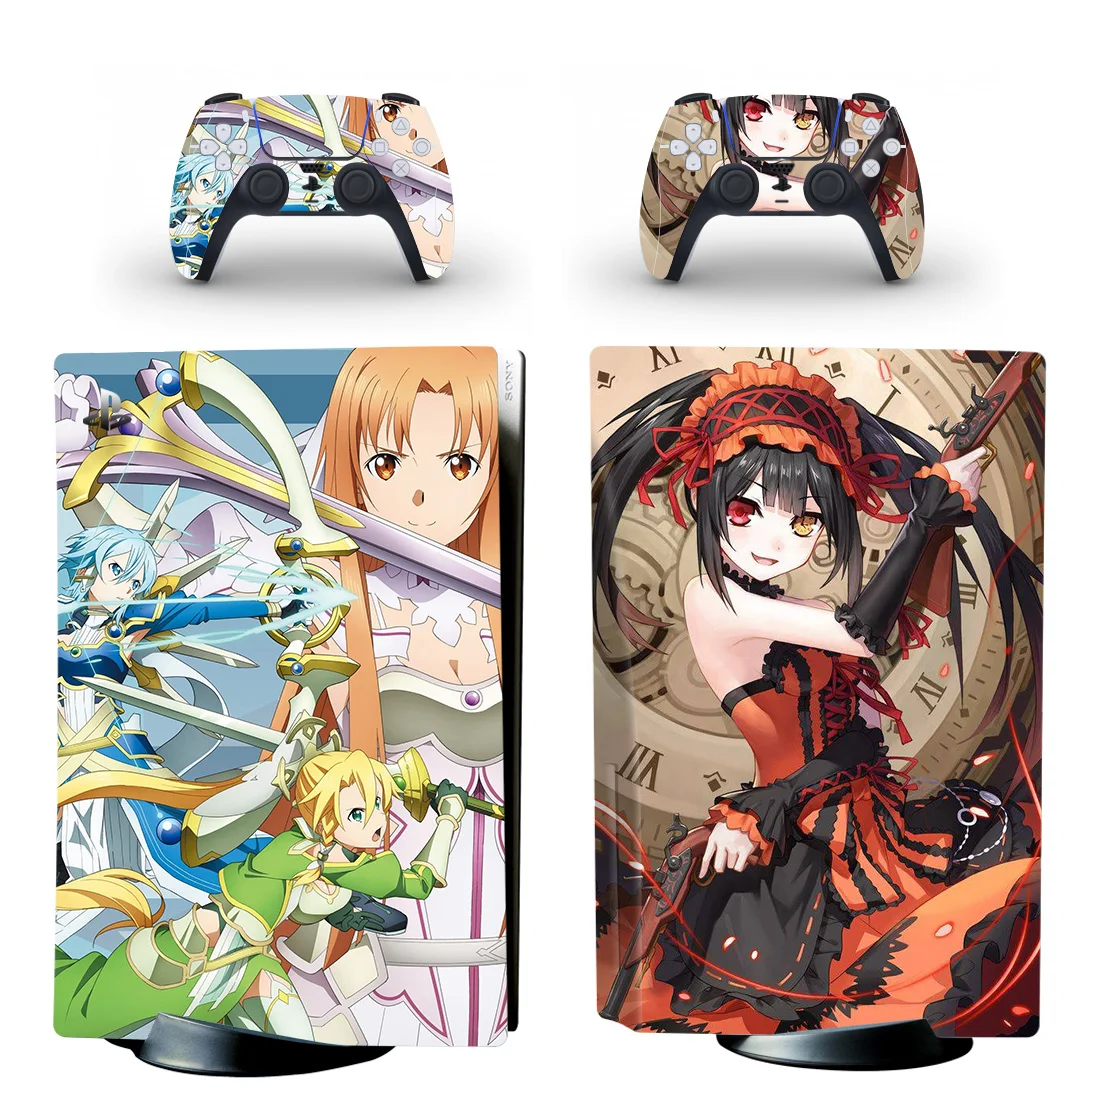 LEEWEE For PS5 Skin Disc Edition Anime Console and Controller Vinyl Cover  Skins Wraps for PS 5 Disc Version 11504 No Foam  Amazonde PC  Video  Games